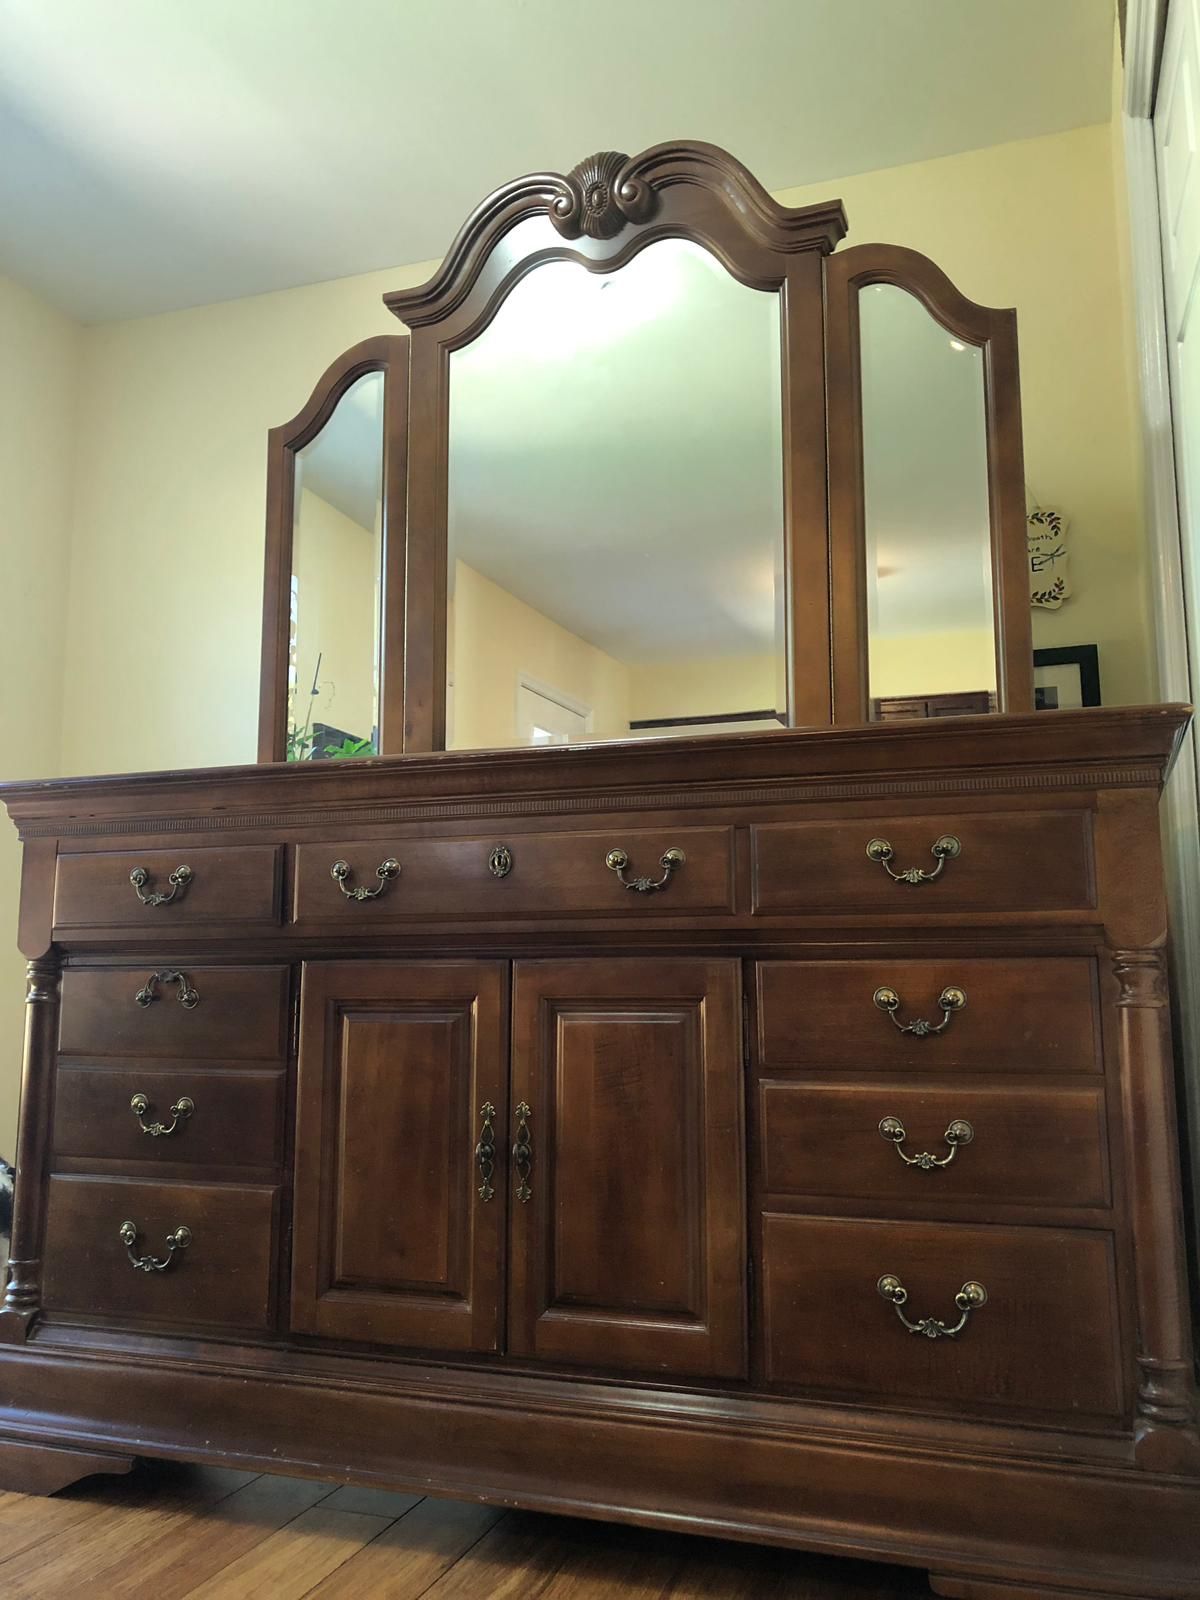 AMERICAN MADE SUMTER CABINET CO. SOLID CHERRY WOOD CHIPPENDALE STYLE 64″ DOOR DRESSER WITH A 3 SECTION MIRROR AND SOLID CHERRY WOOD BED SET